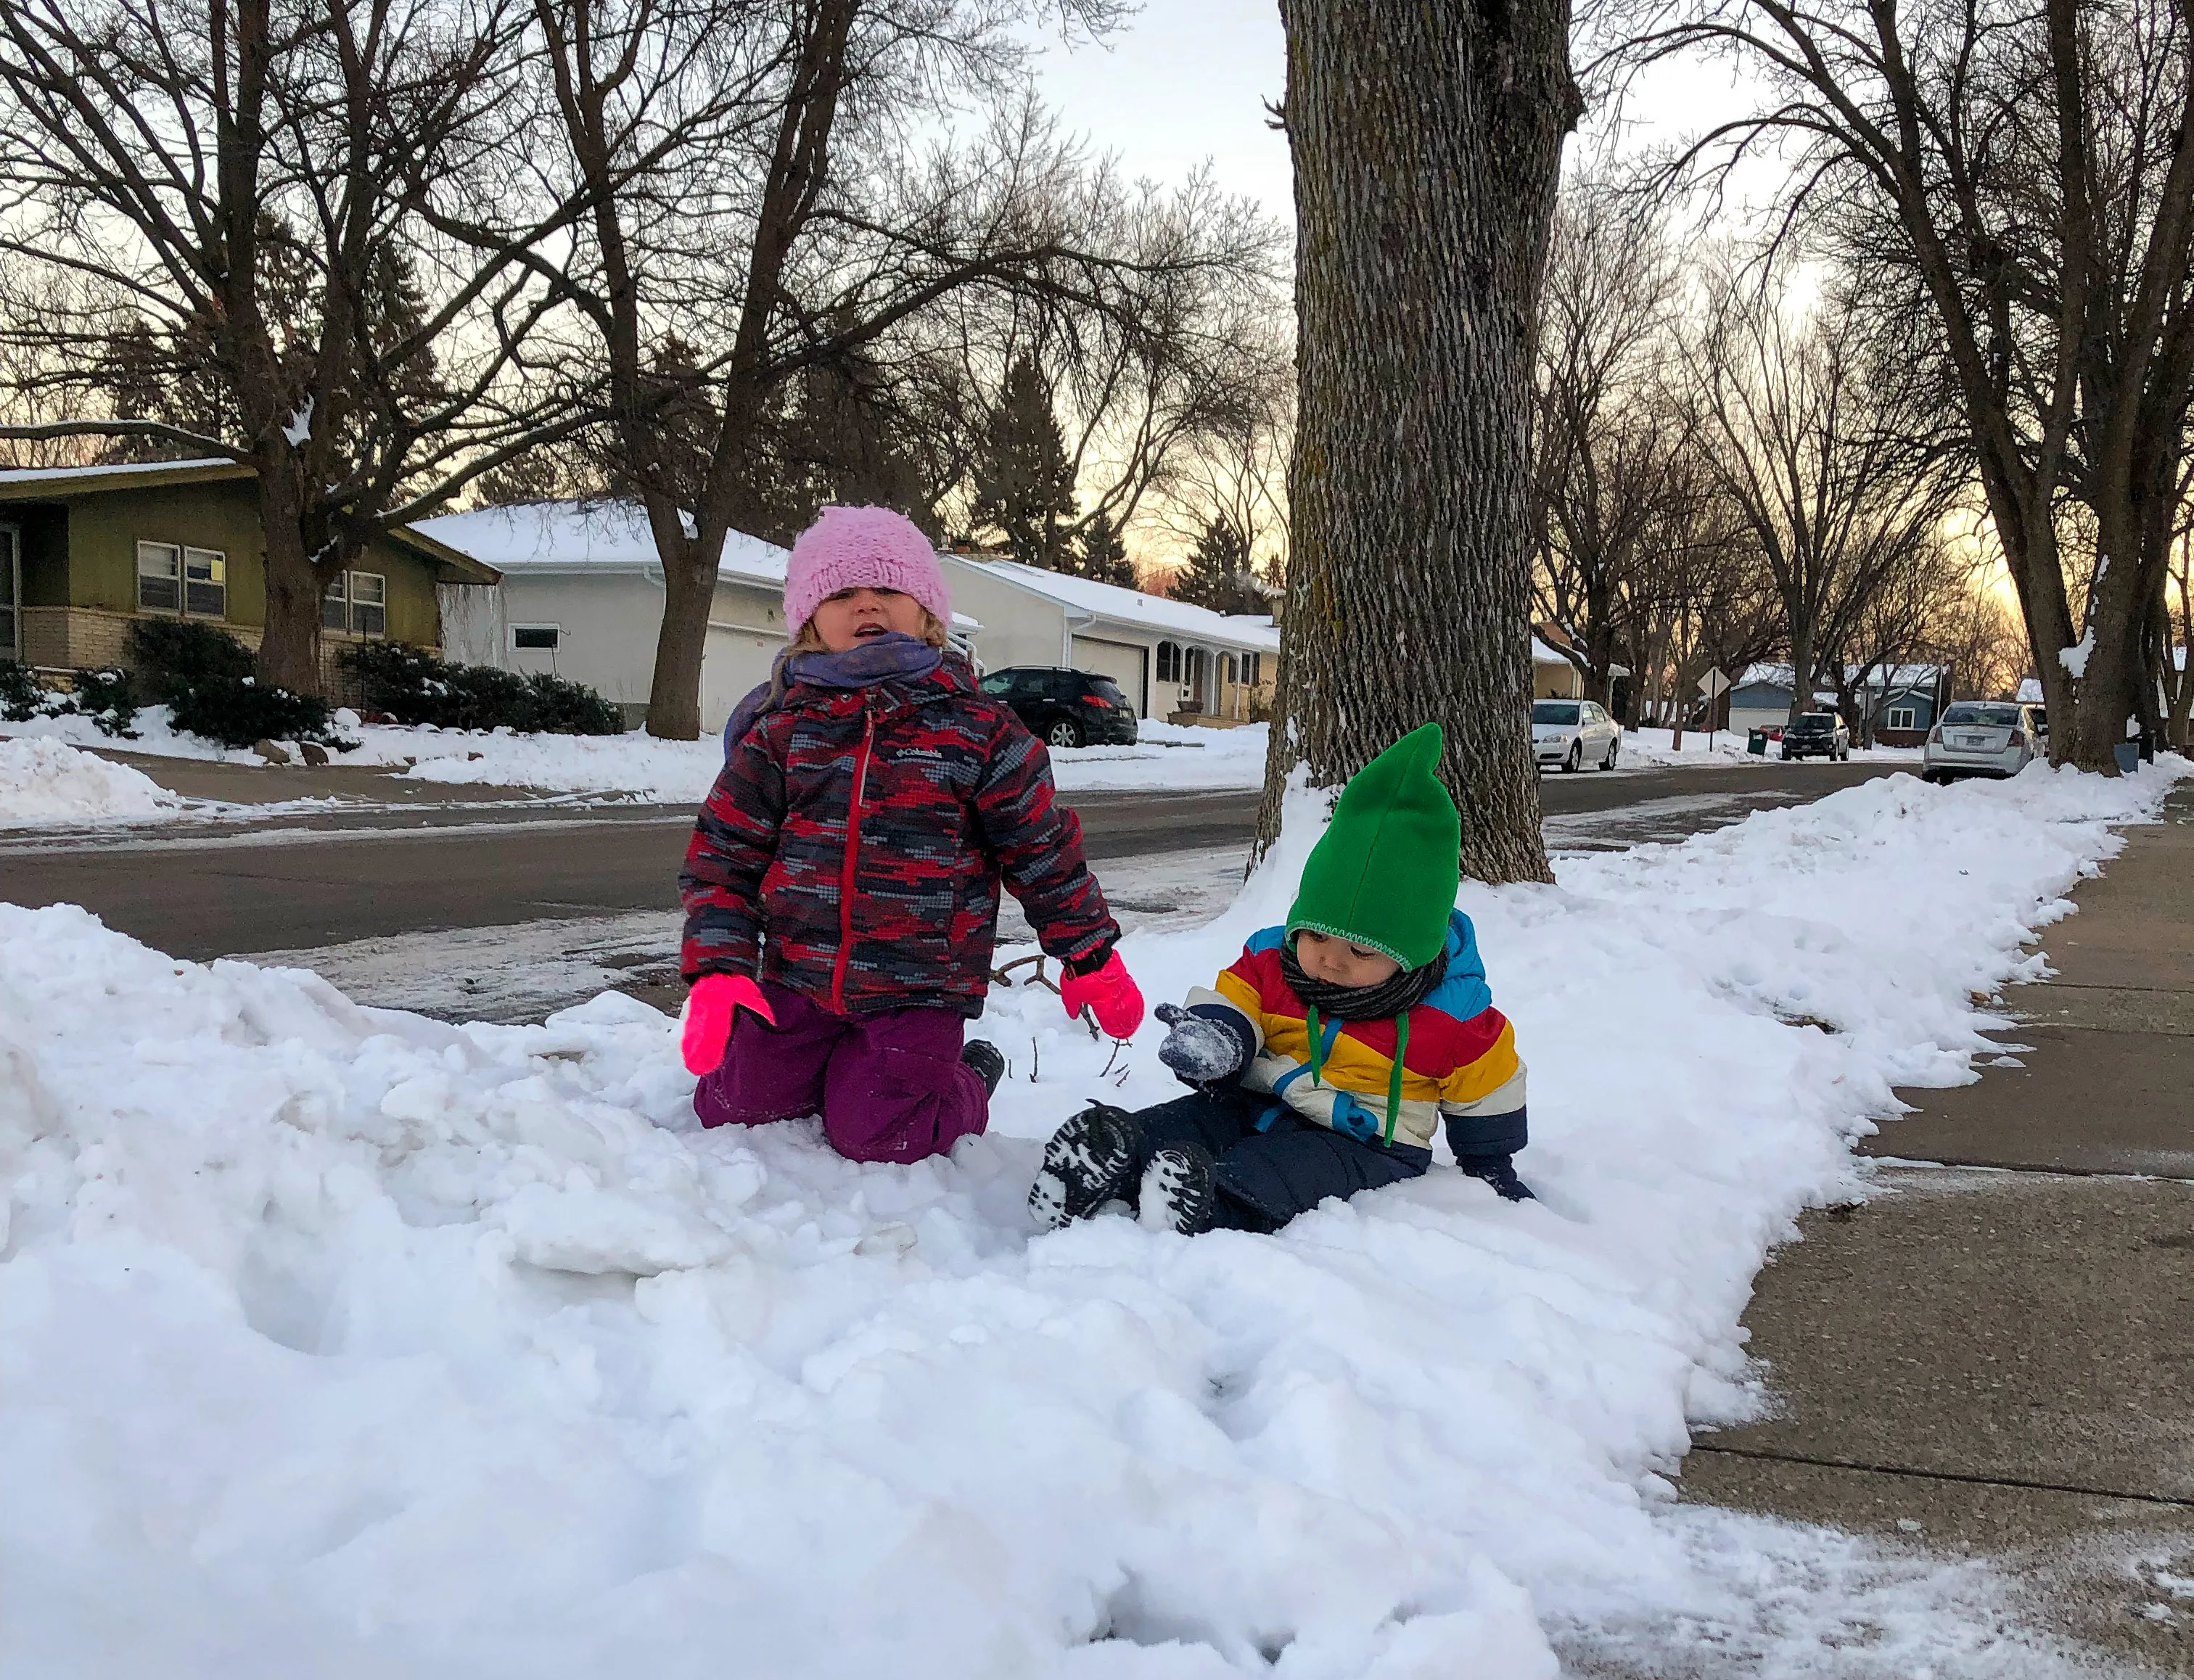 A Montessori toddler and preschooler are playing in the snow during the winter.